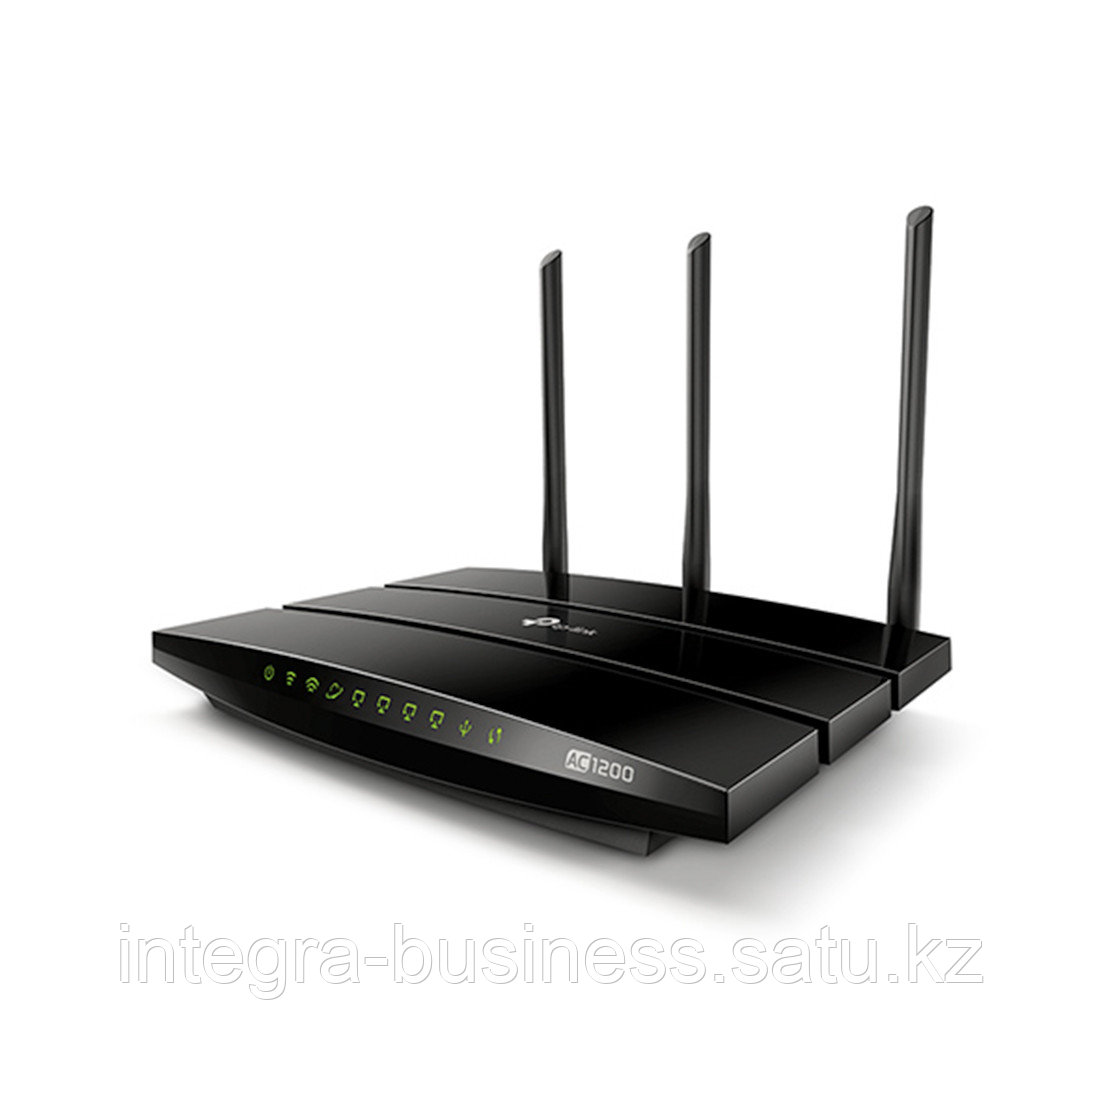 Маршрутизатор TP-Link Archer C1200, фото 1